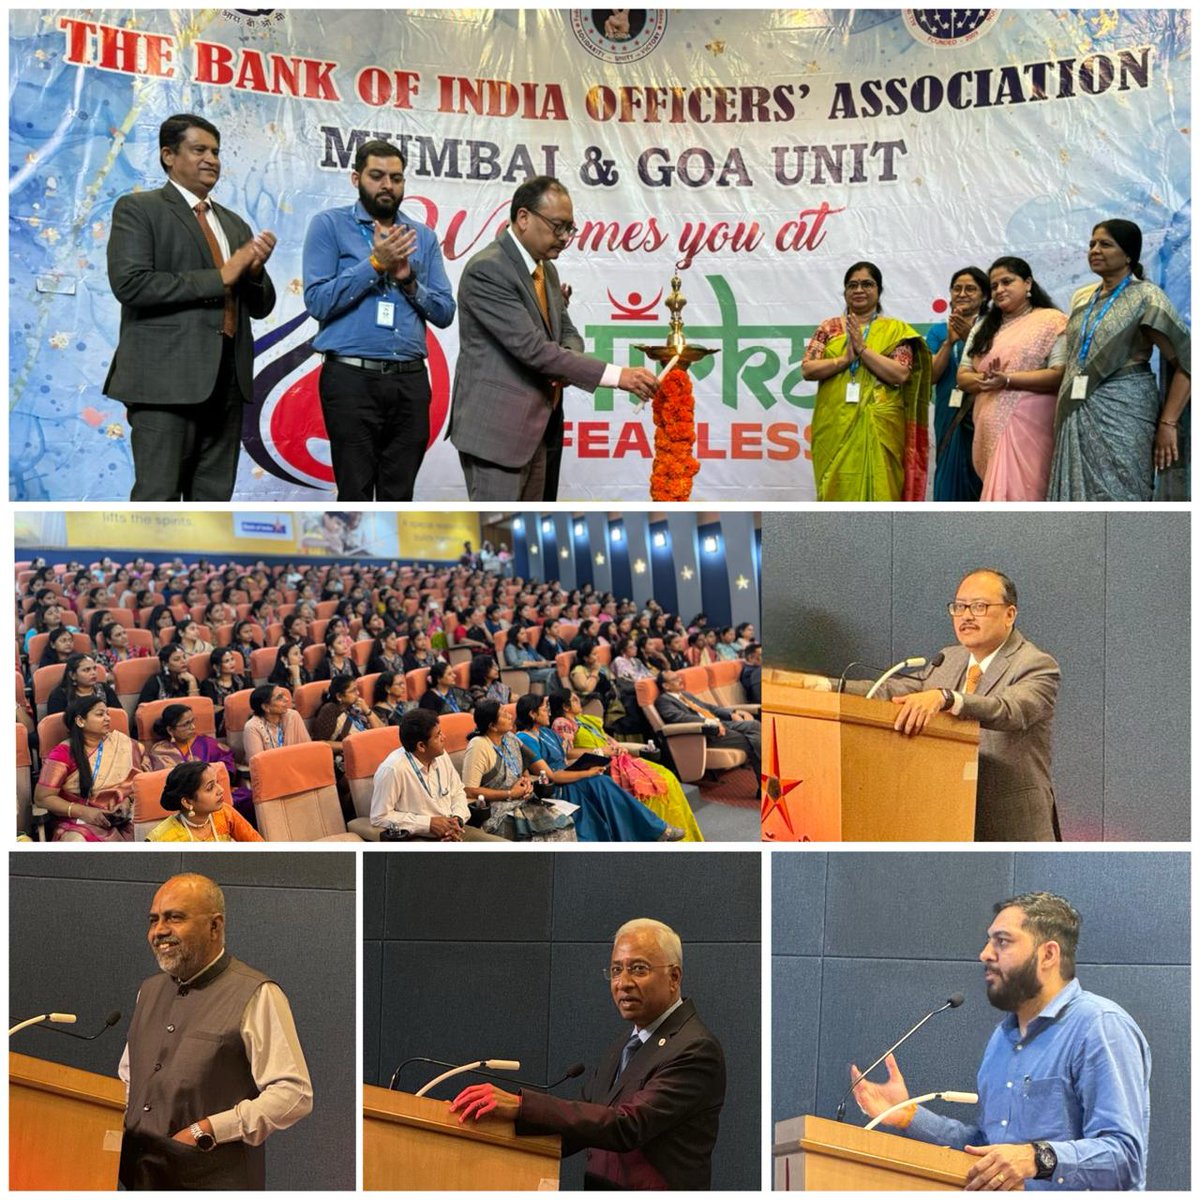 @BOIOAMNG held an advanced celebration of this year's International Women's Day, at the inception of the week under the theme 'Hirkani'. The overall program was conducted in an absolute joyous manner, graced by presence of our Esteemed Executives - MD & CEO Shri Rajneesh